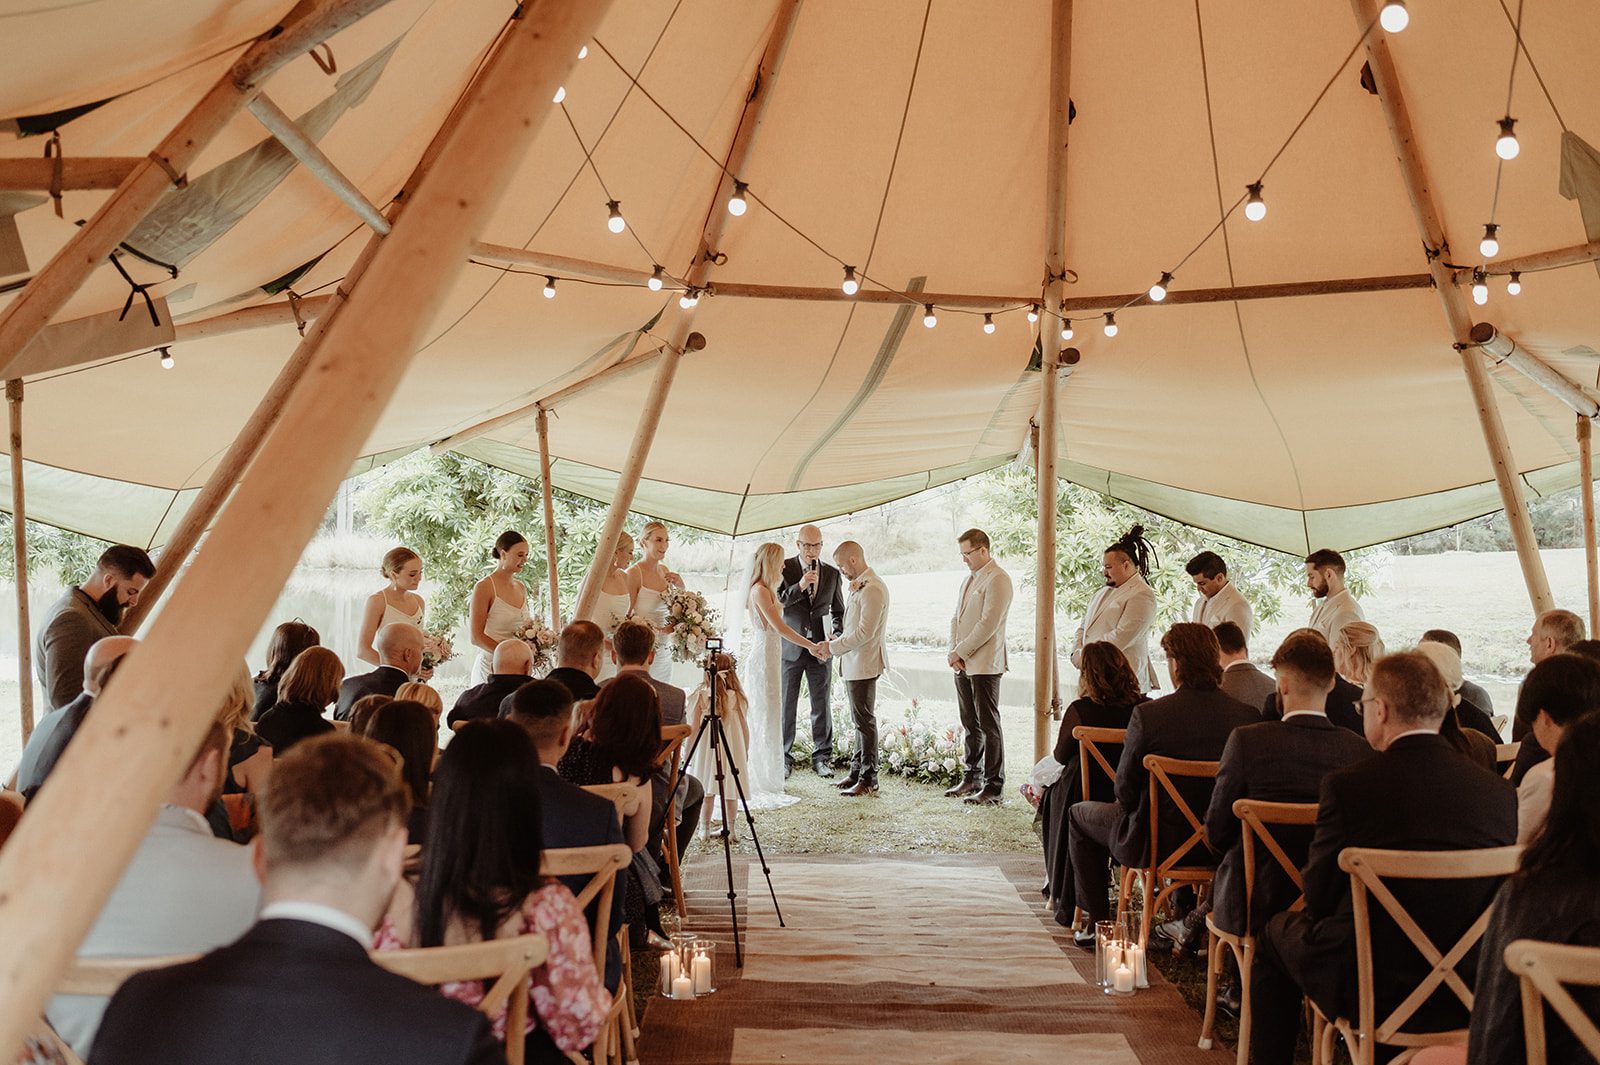 getting married in a tipi, aisle